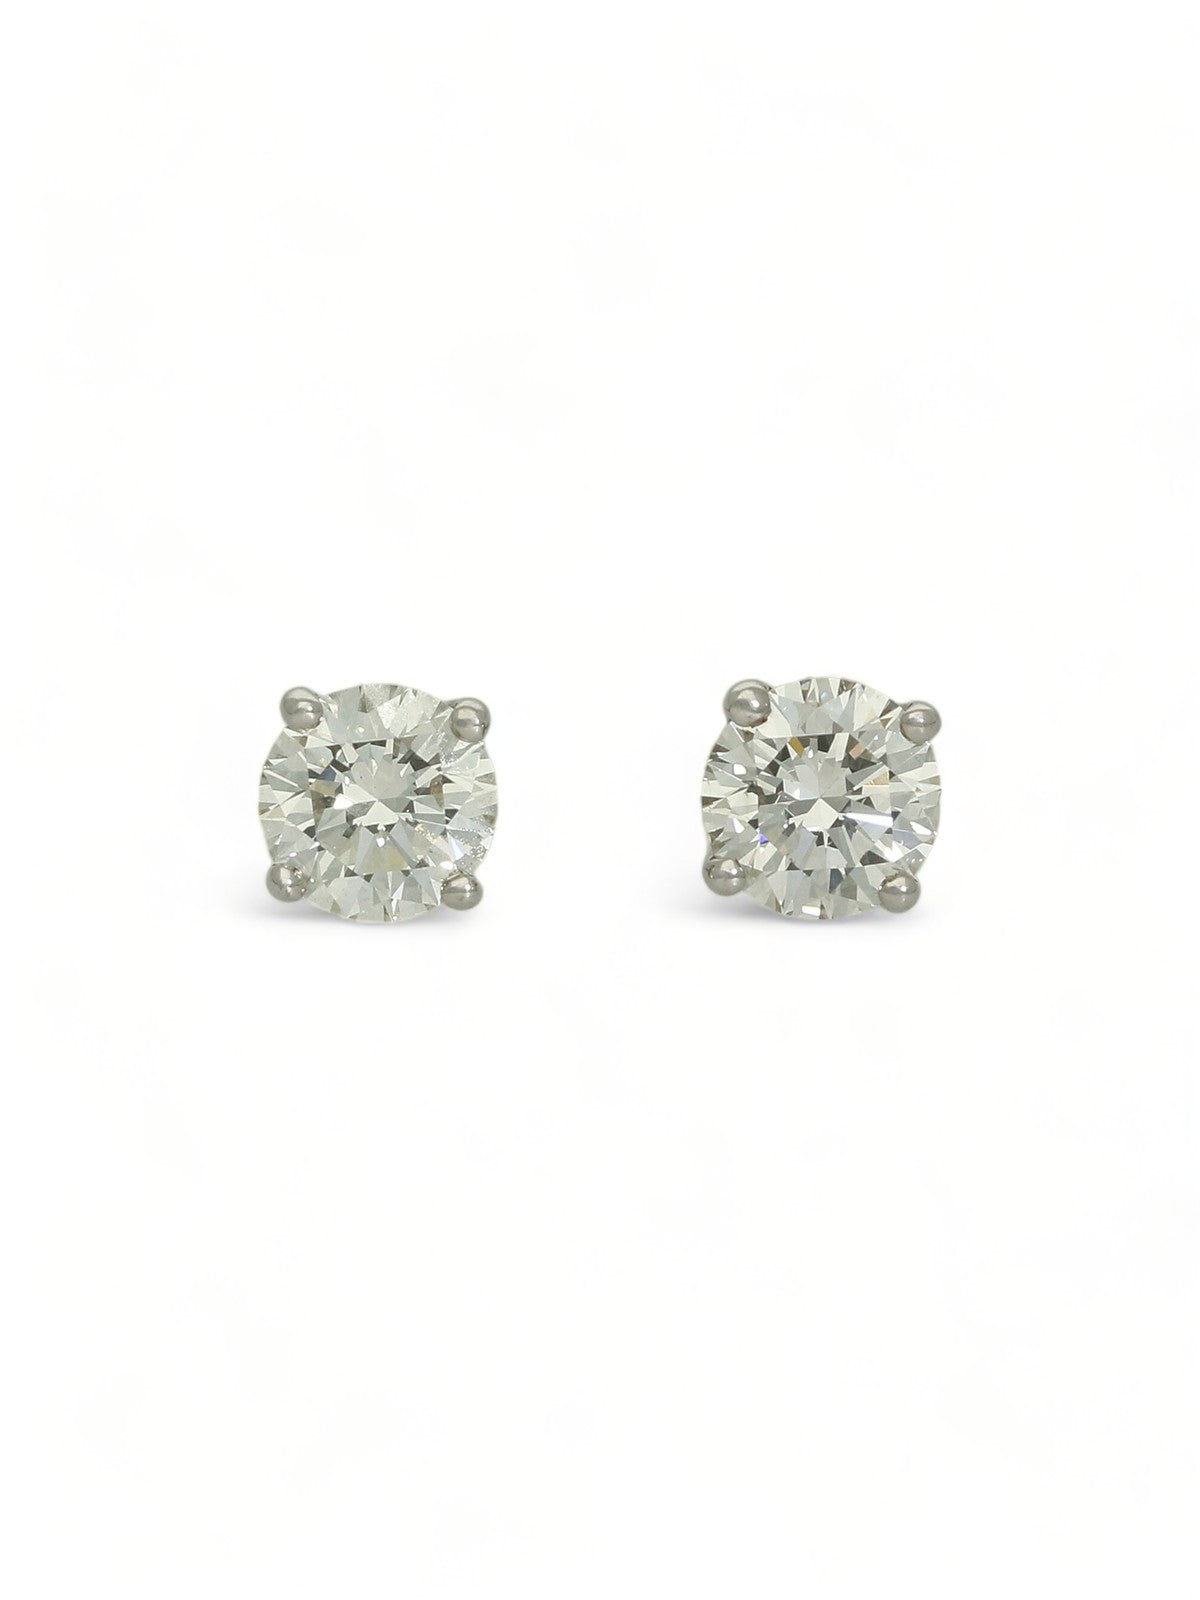 Diamond Solitaire Stud Earrings "The Catherine Collection" 1.00ct Round Brilliant Cut in 18ct White Gold